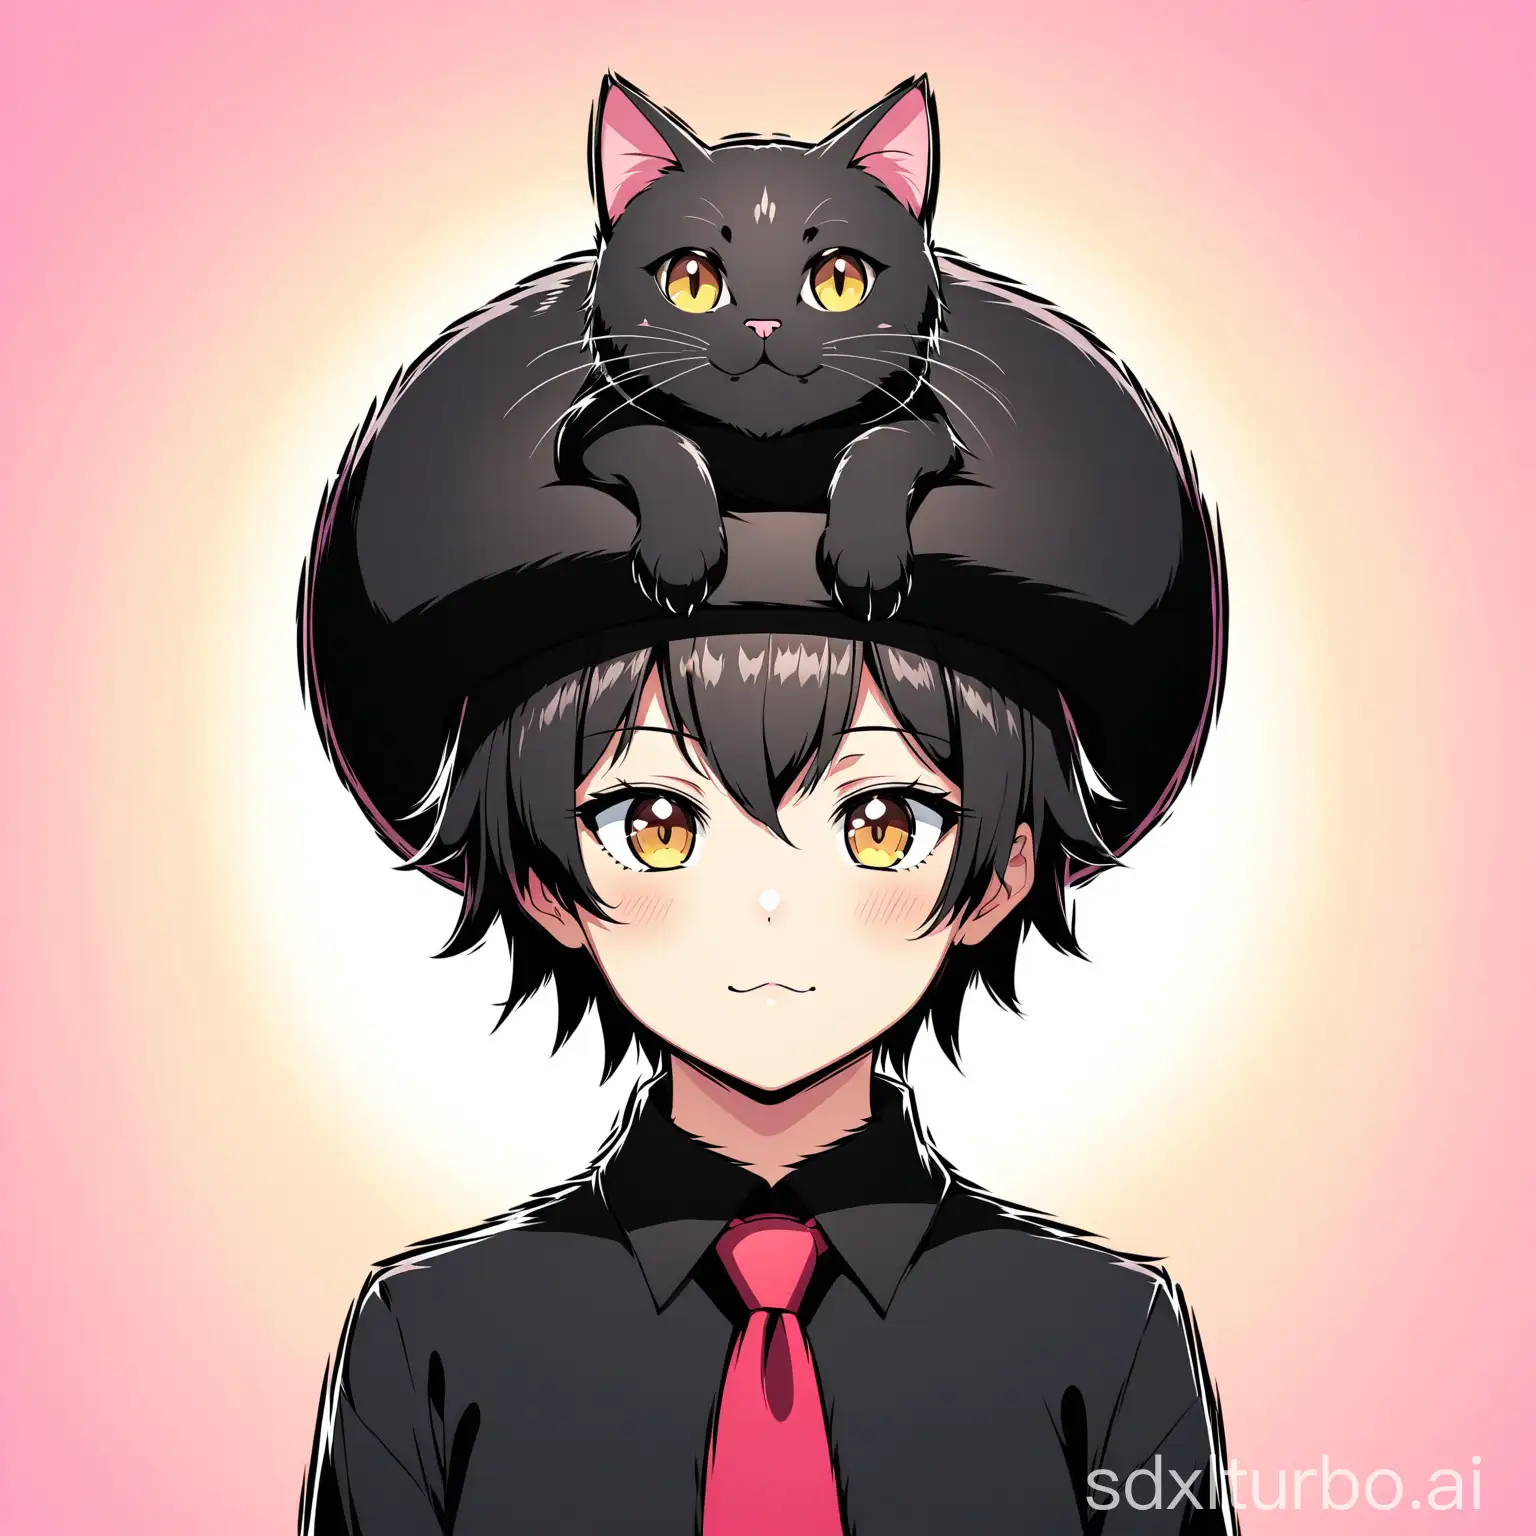 Black-Cat-with-Ruby-Gem-on-Its-Head